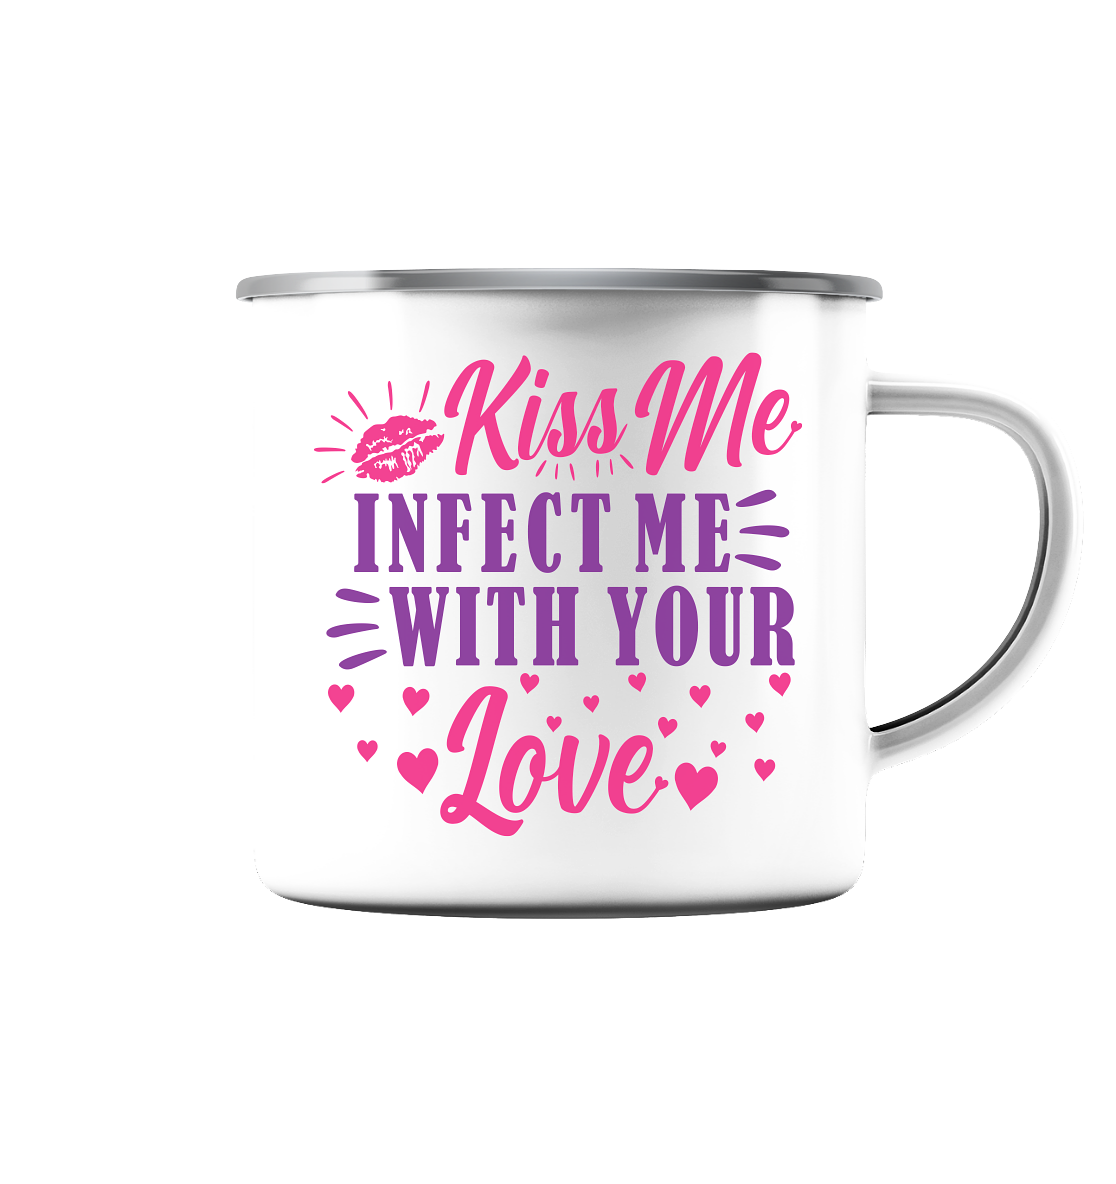 Kiss me infect me with your love - Emaille Tasse